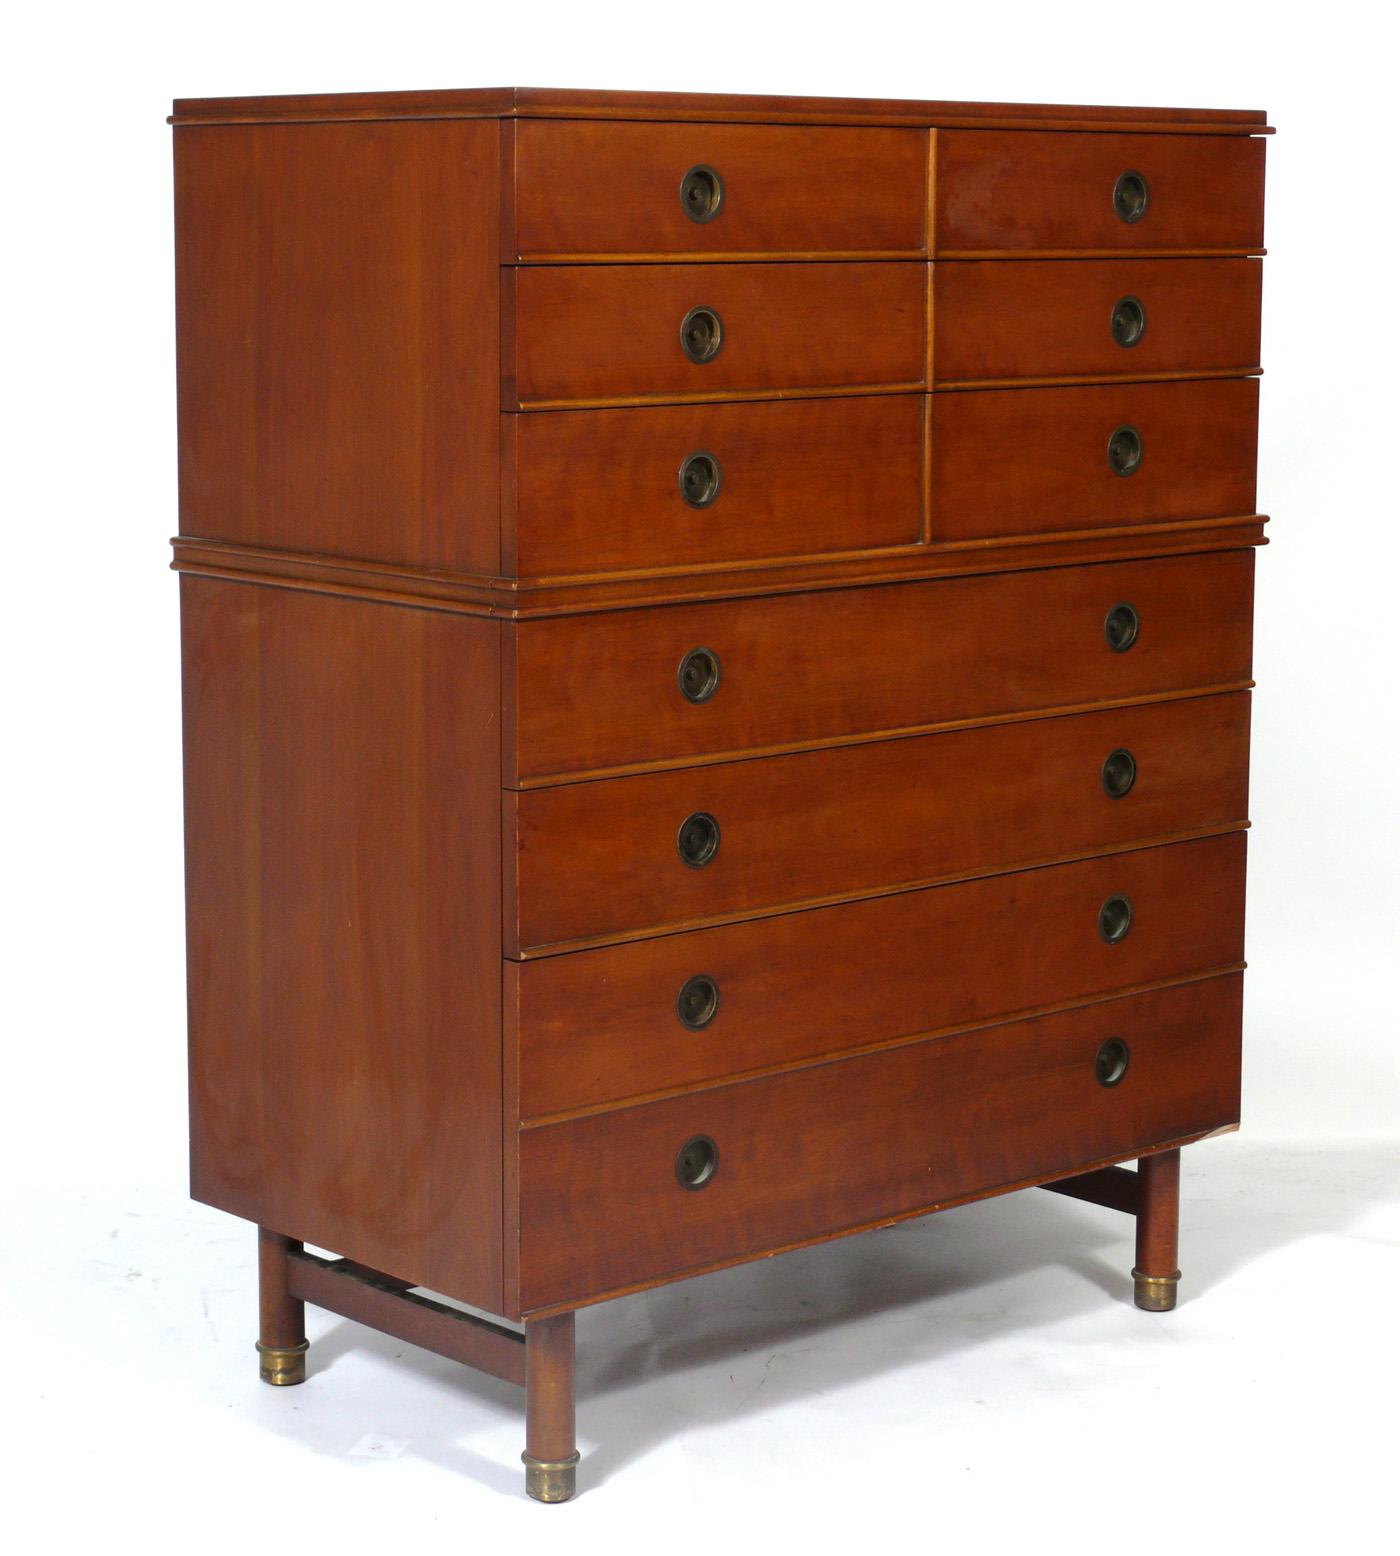 Clean lined midcentury tall chest or dresser, designed by Renzo Rutili for Johnson Furniture, American, circa 1950s. It is a versatile size and can be used as a chest or dresser in a bedroom, or as a bar or media cabinet in a living area. It is